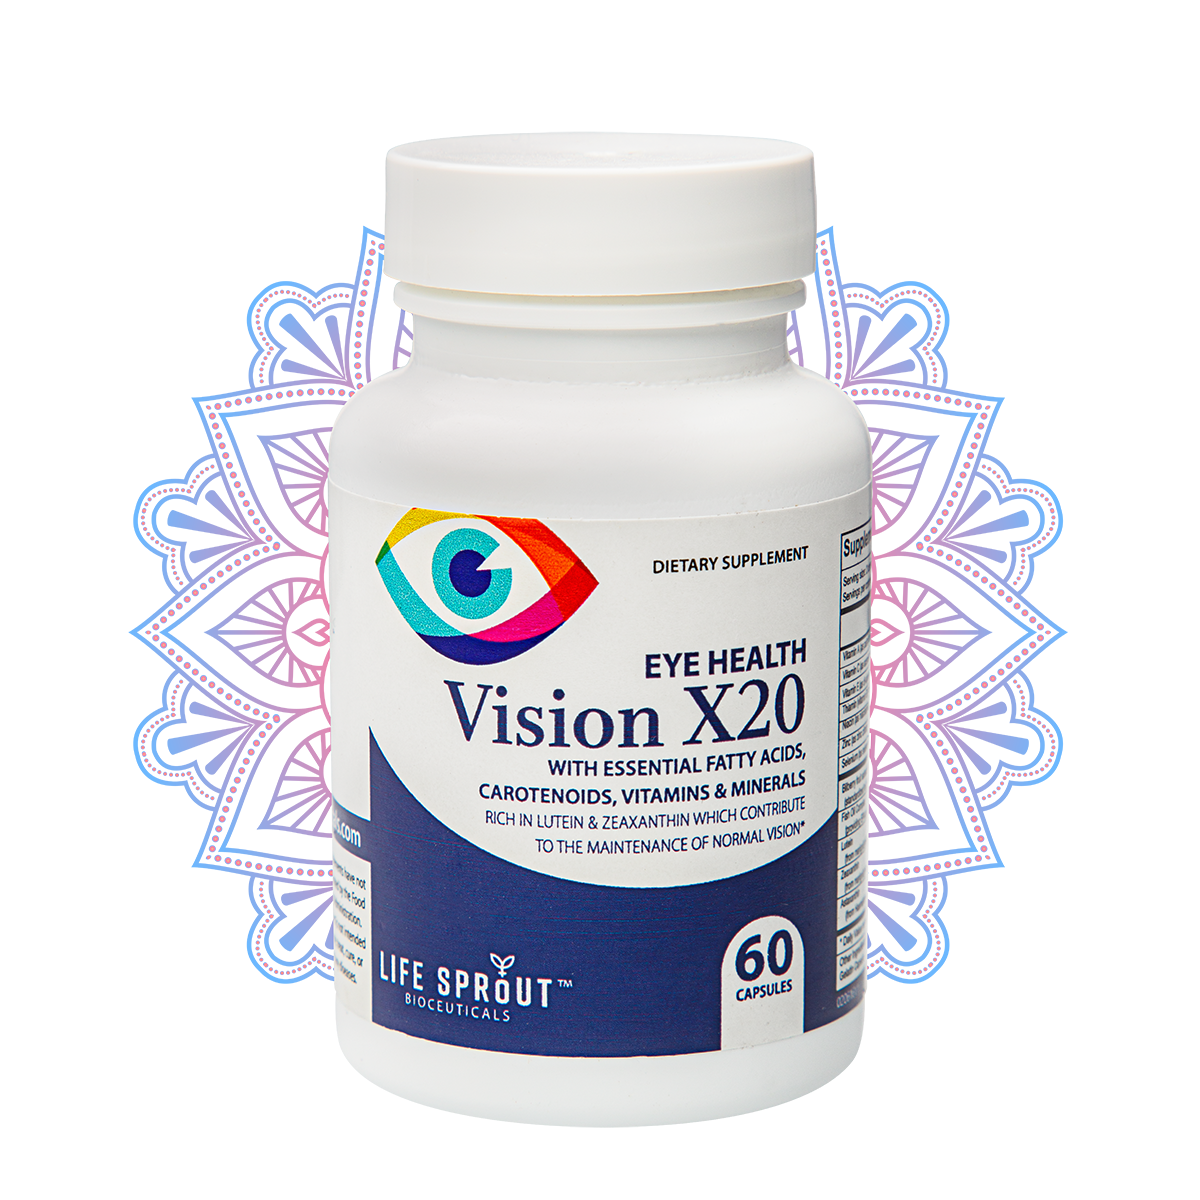 Vision X20 - With 20 + Nutrients for Vision health